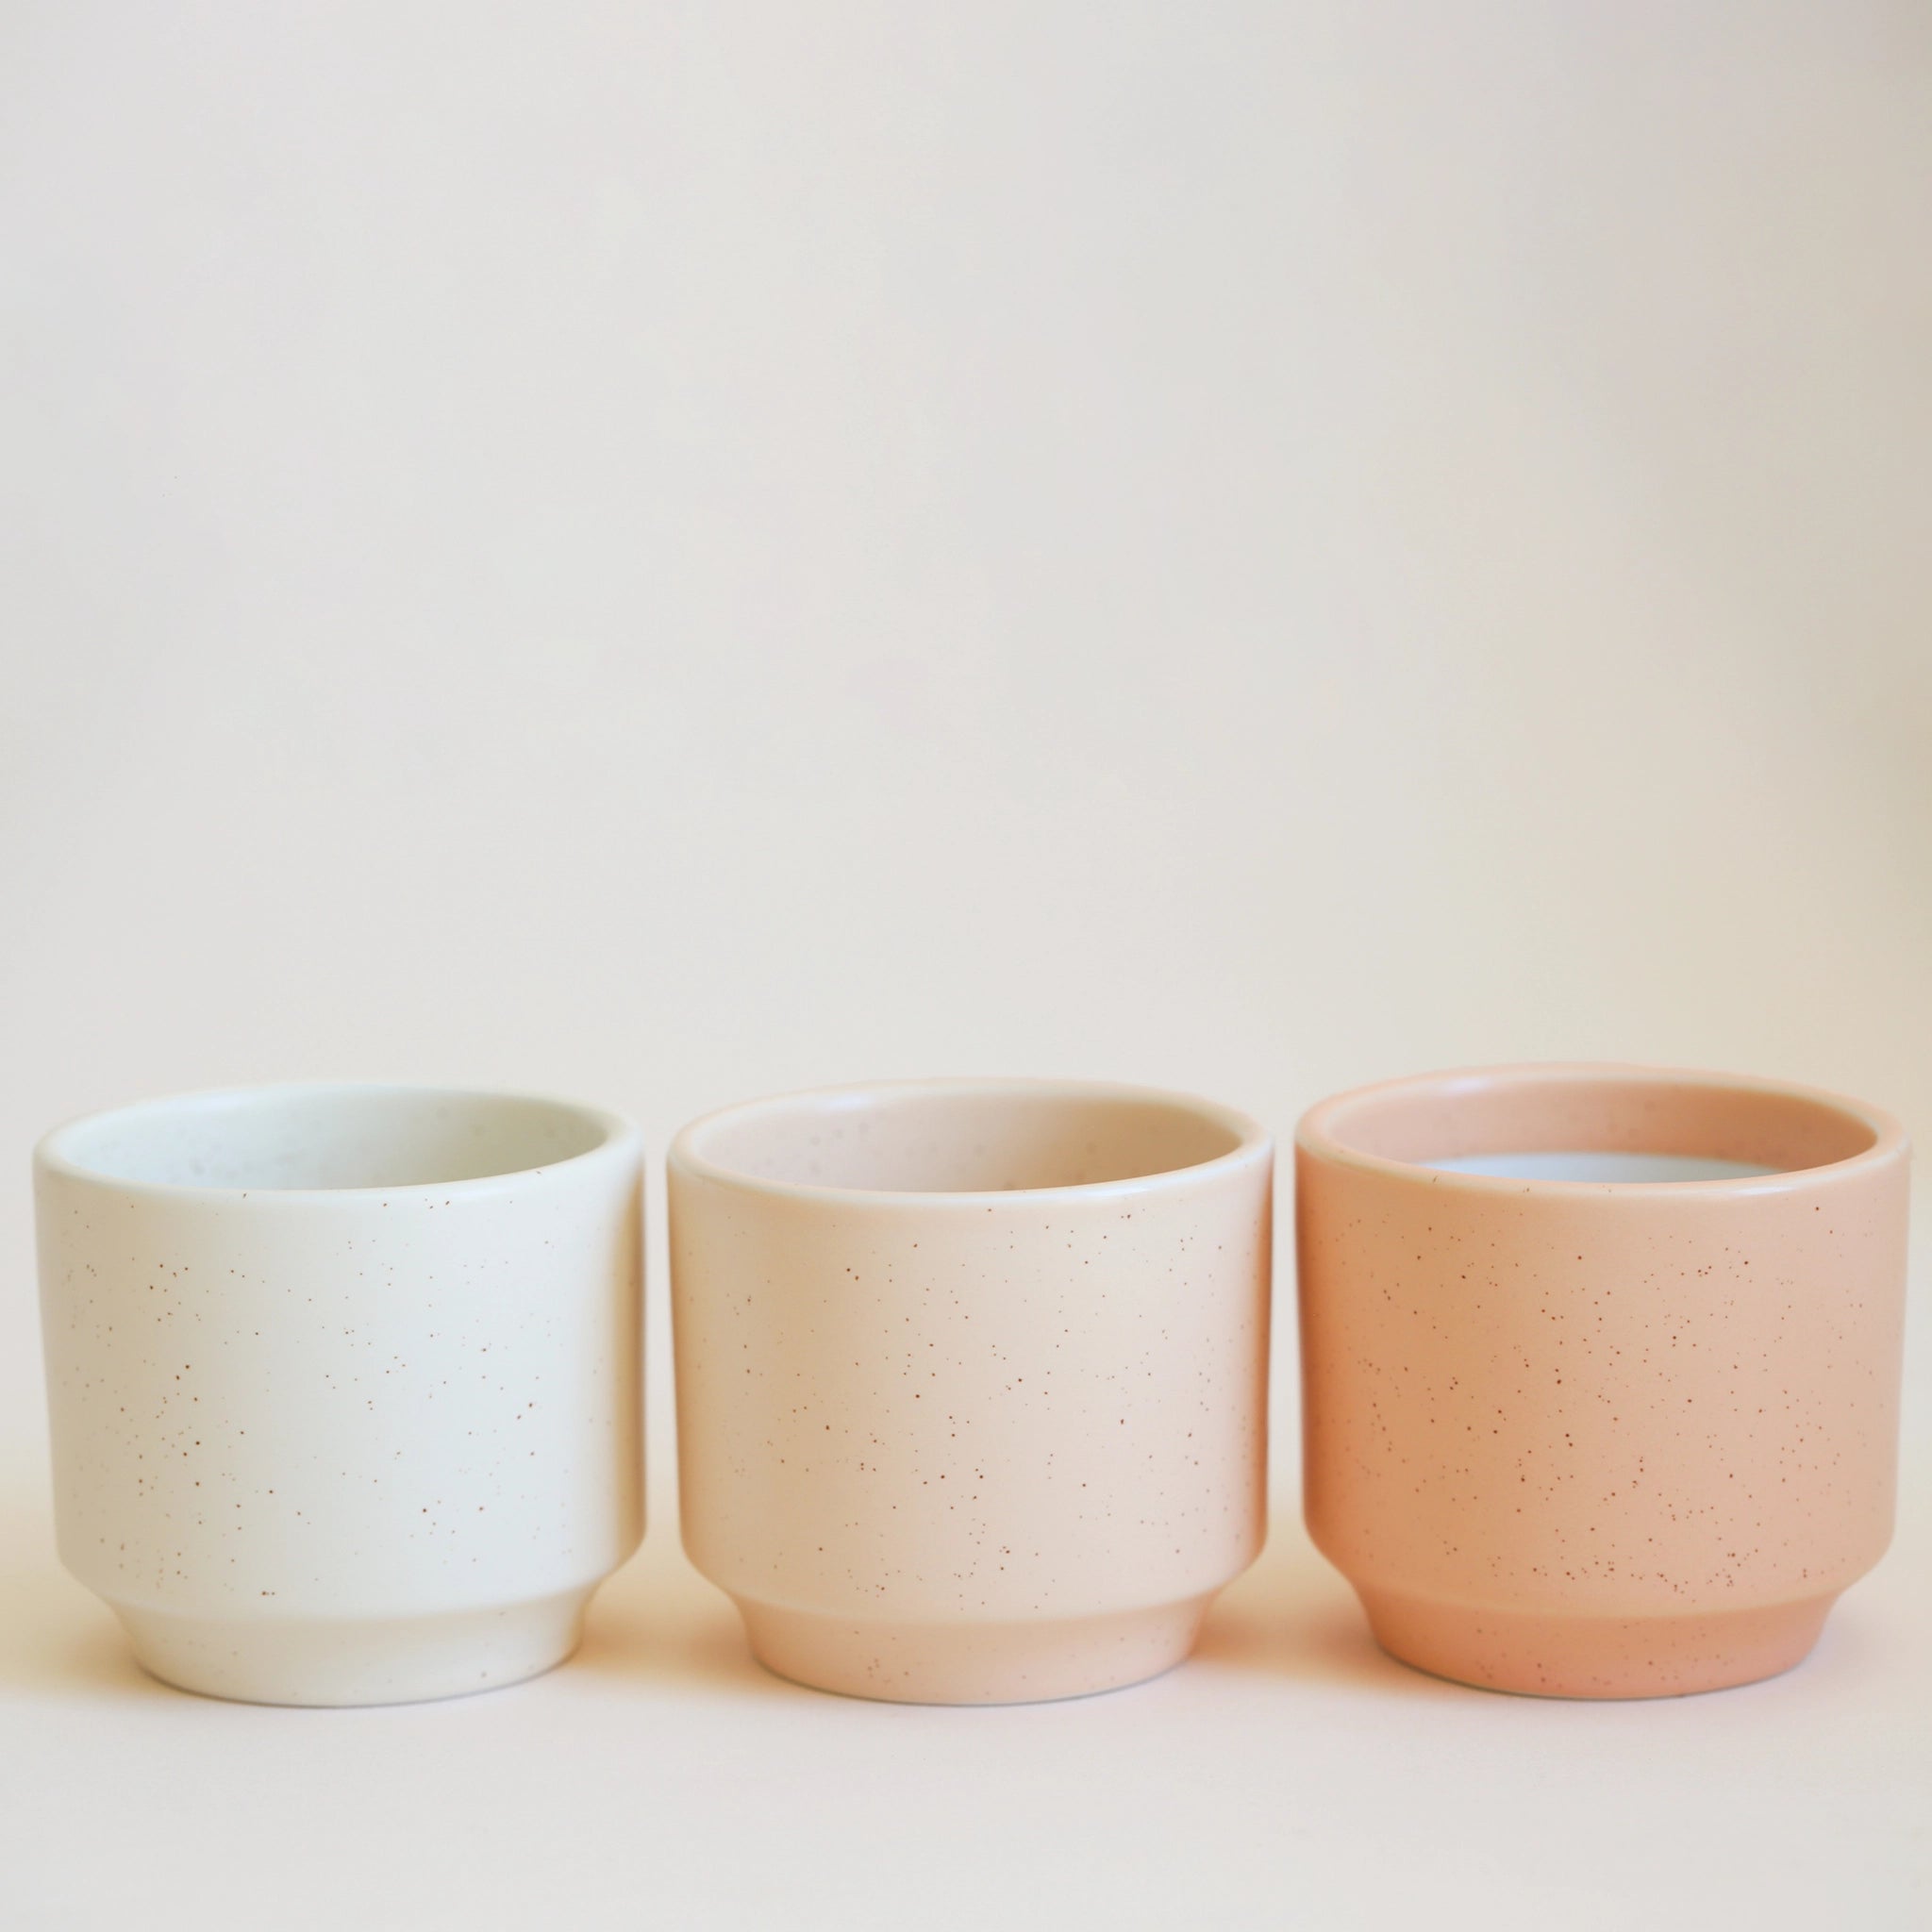 On an ivory background is three ceramic planters in different colors. From left to right the colors are Vintage White, Vanilla, and Sunset.